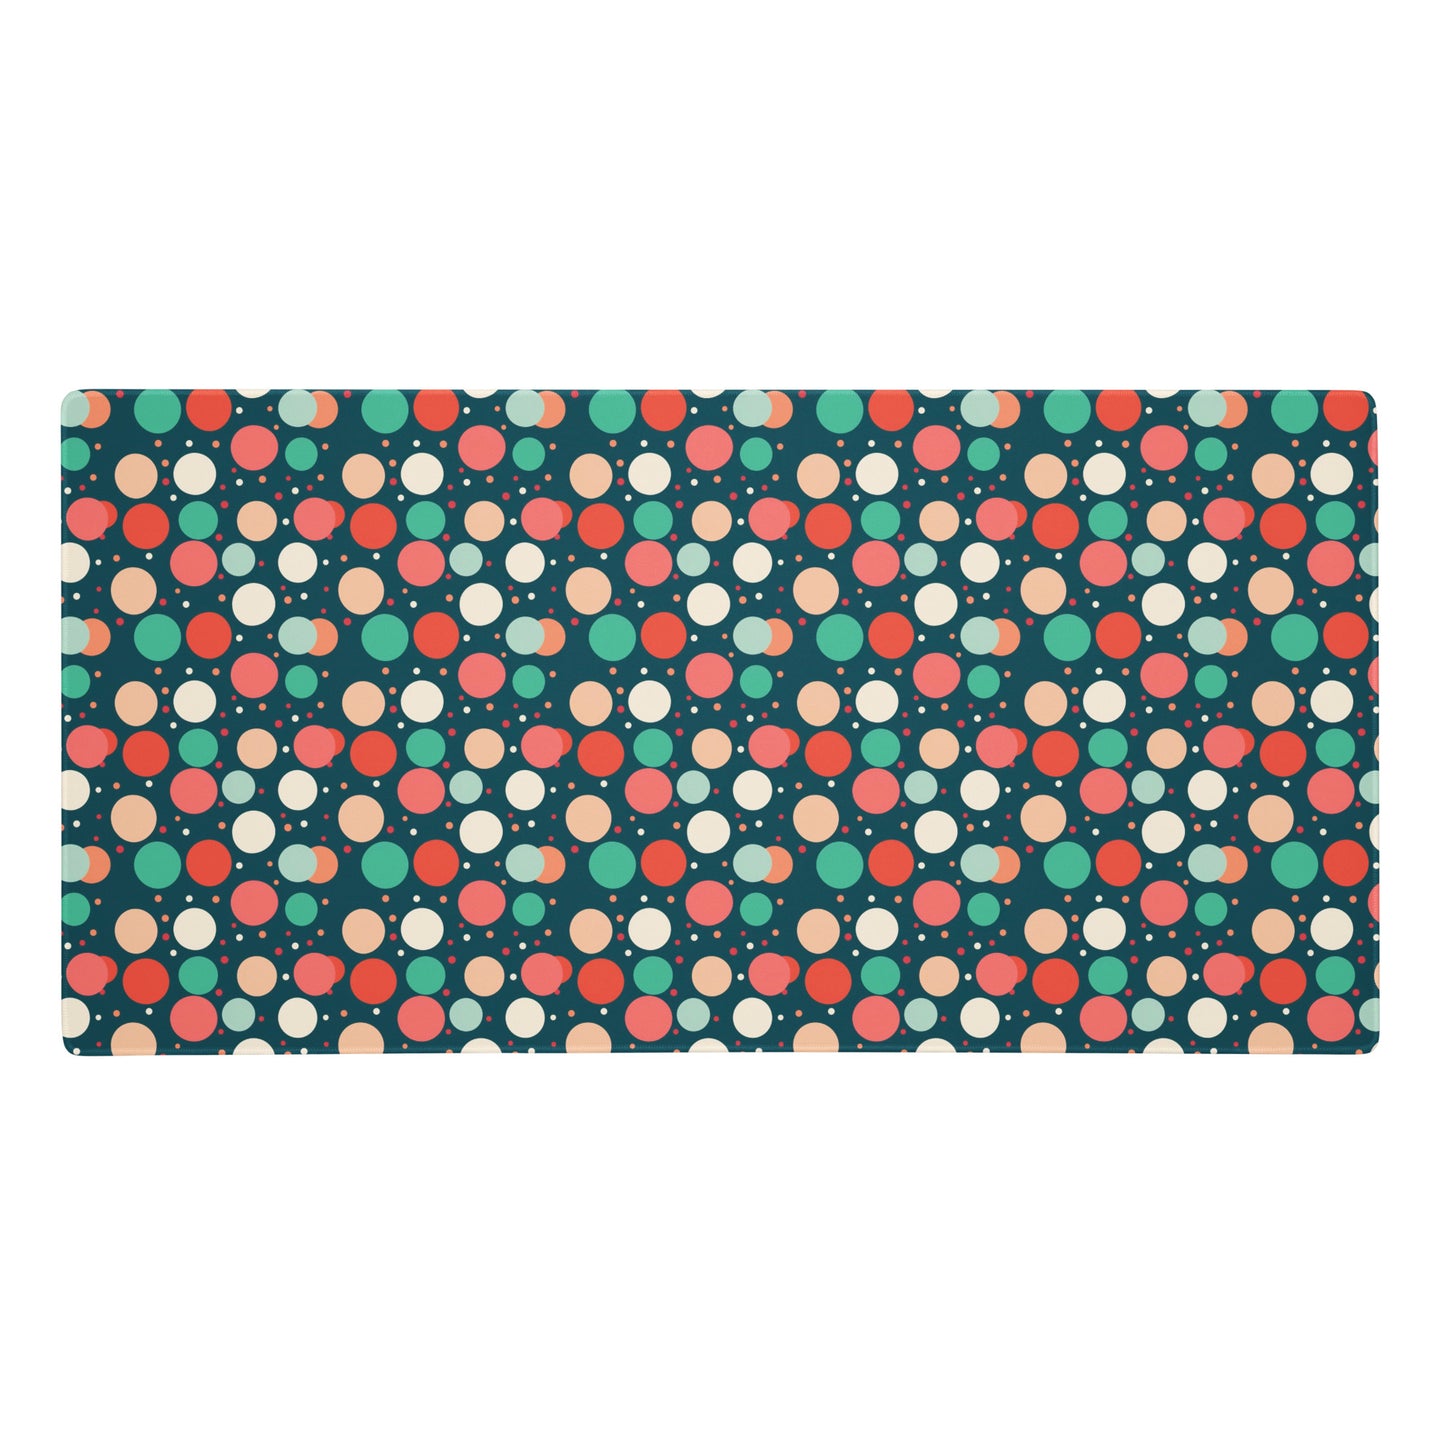  A 36" x 18" desk pad with red teal and yellow polka dot pattern.